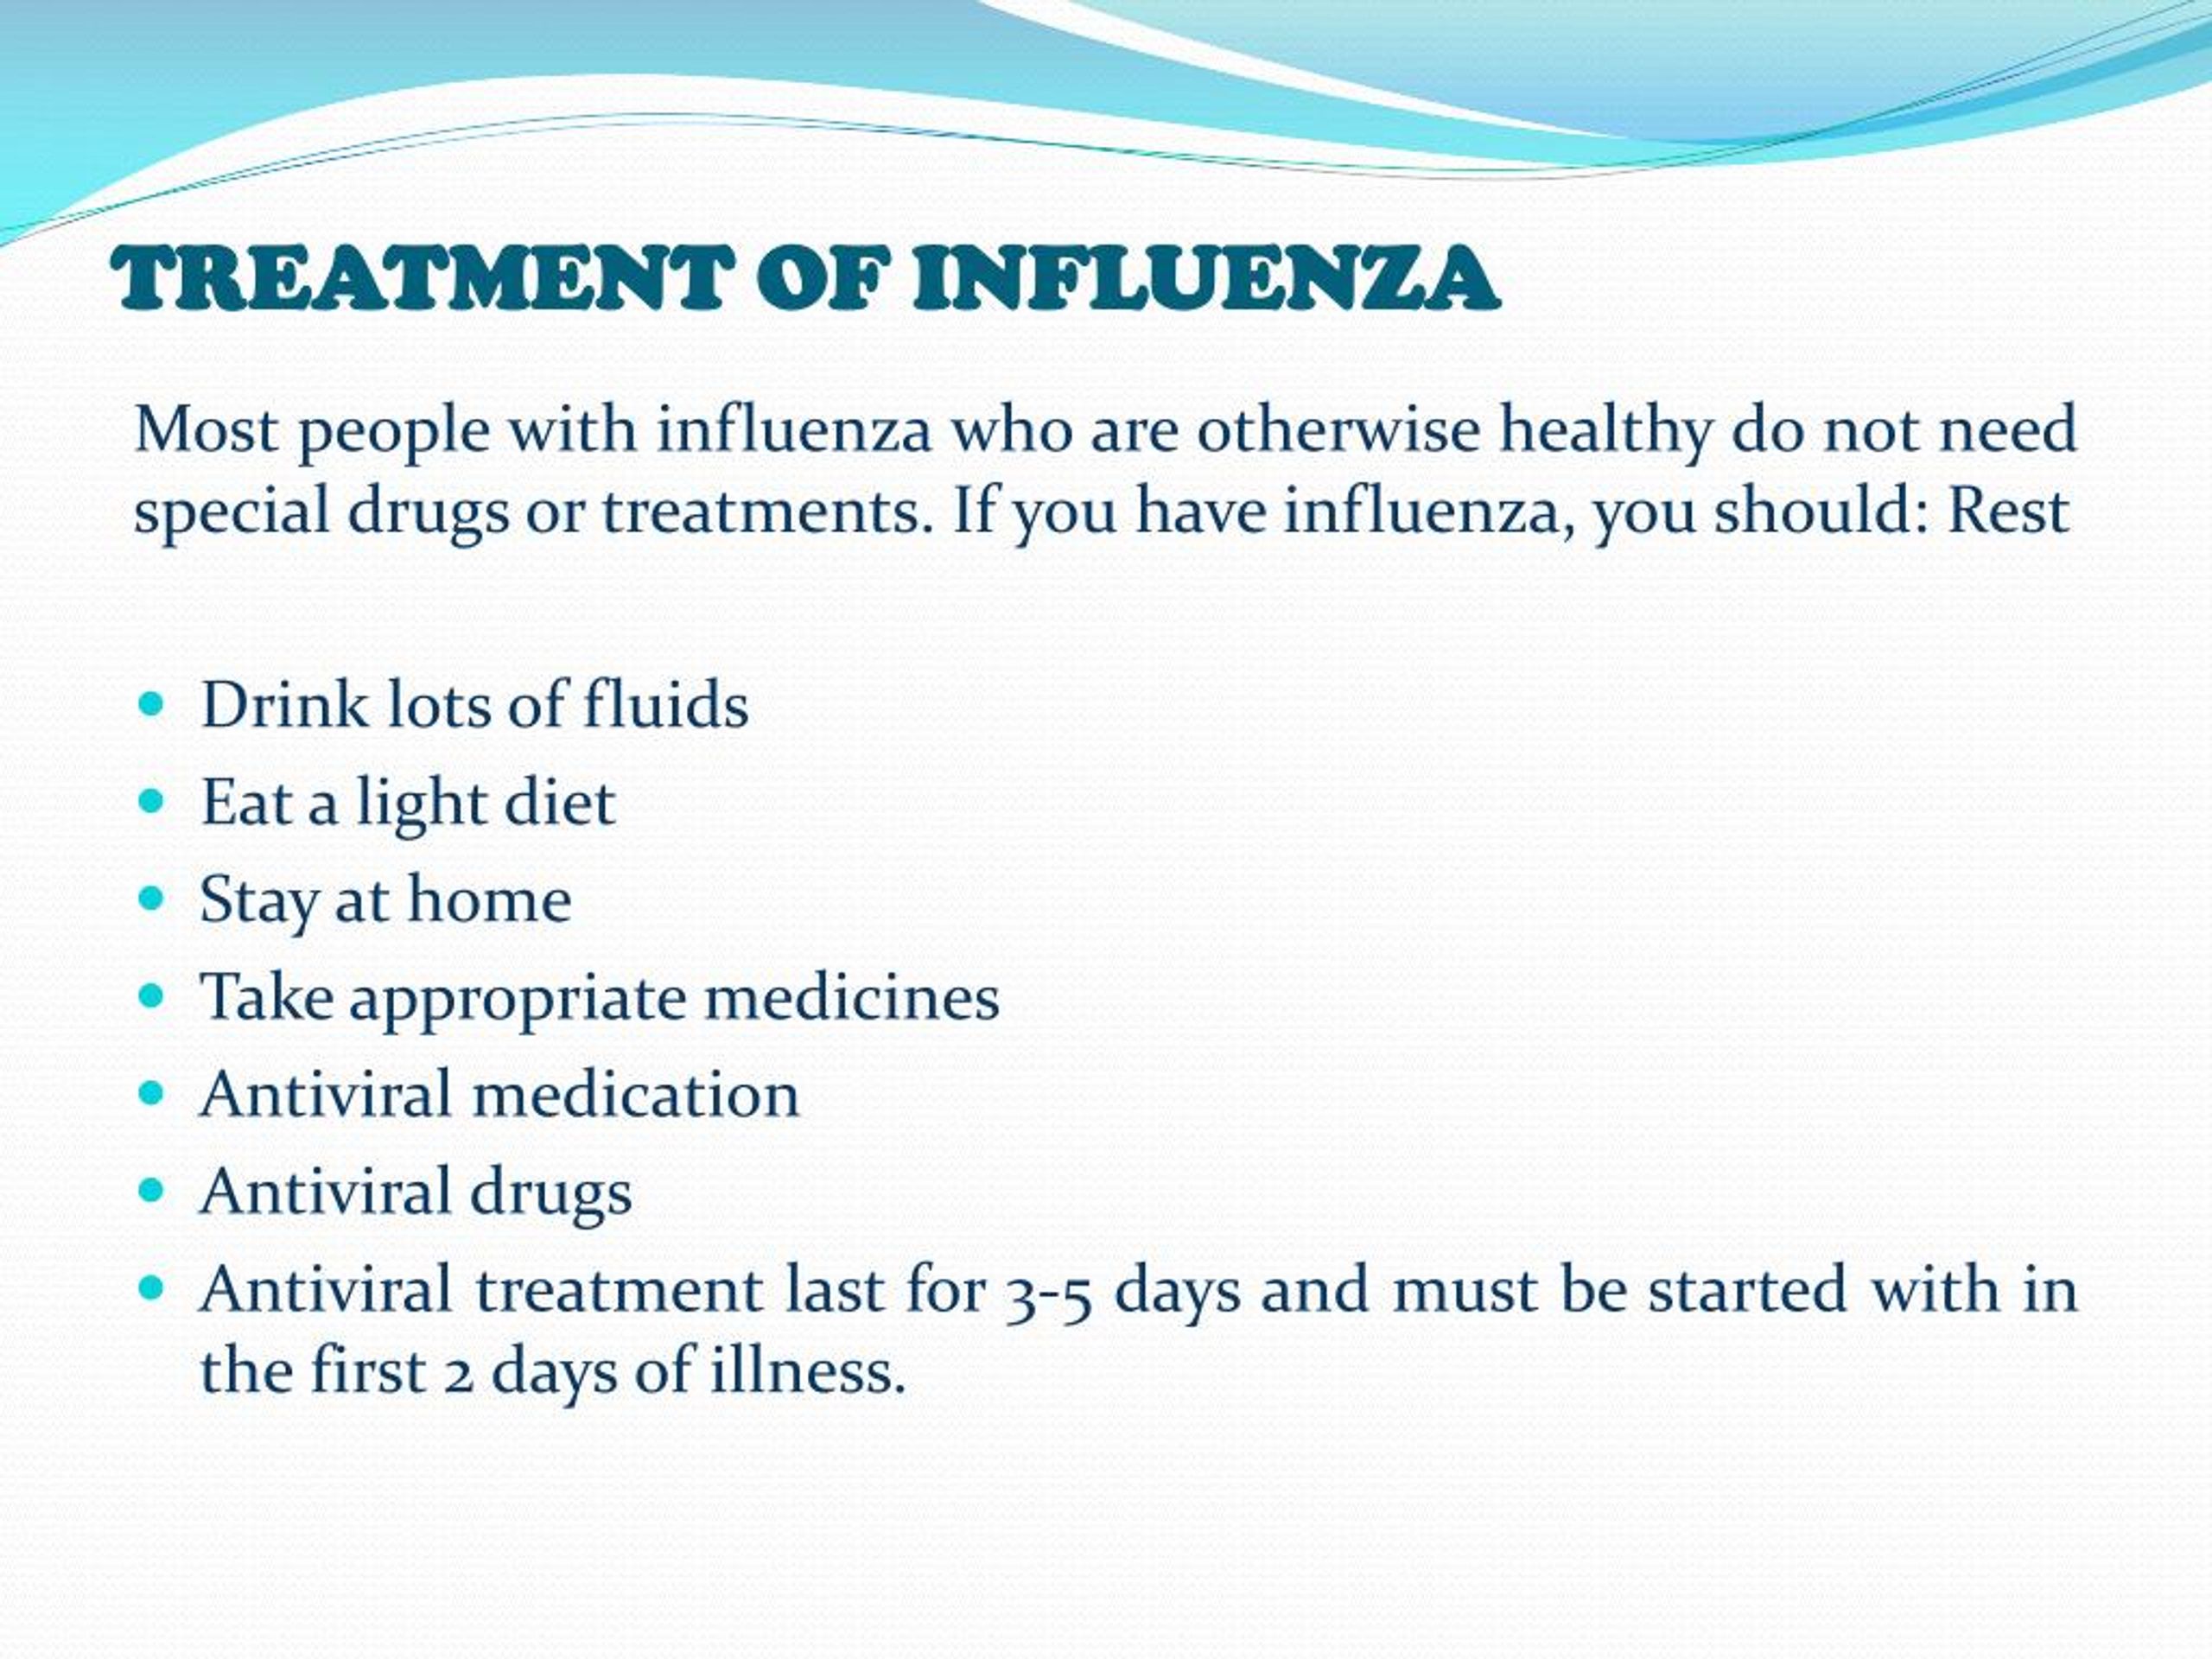 Ppt Influenza Symptoms Causes Treatment And Prevention Powerpoint Presentation Id7494395 9453